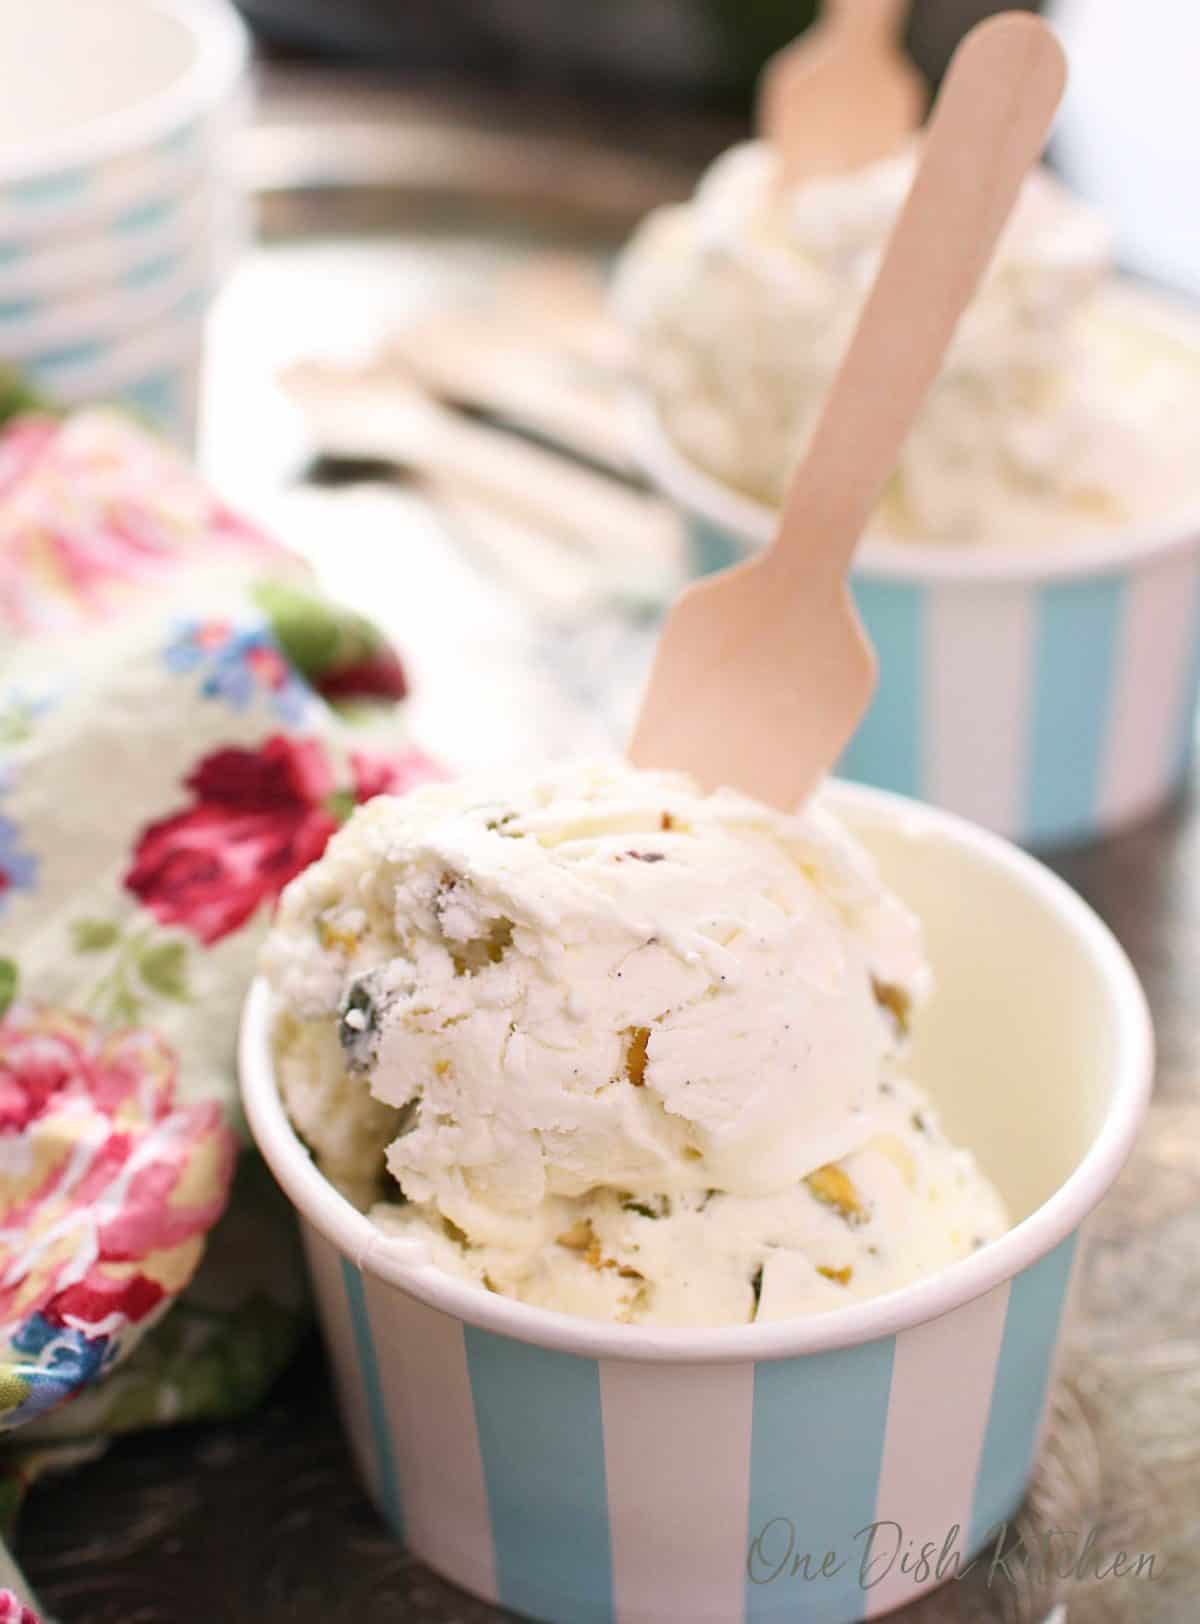 a blue and white striped cup filled with pistachio ice cream with a wooden spoon sticking out of the side.